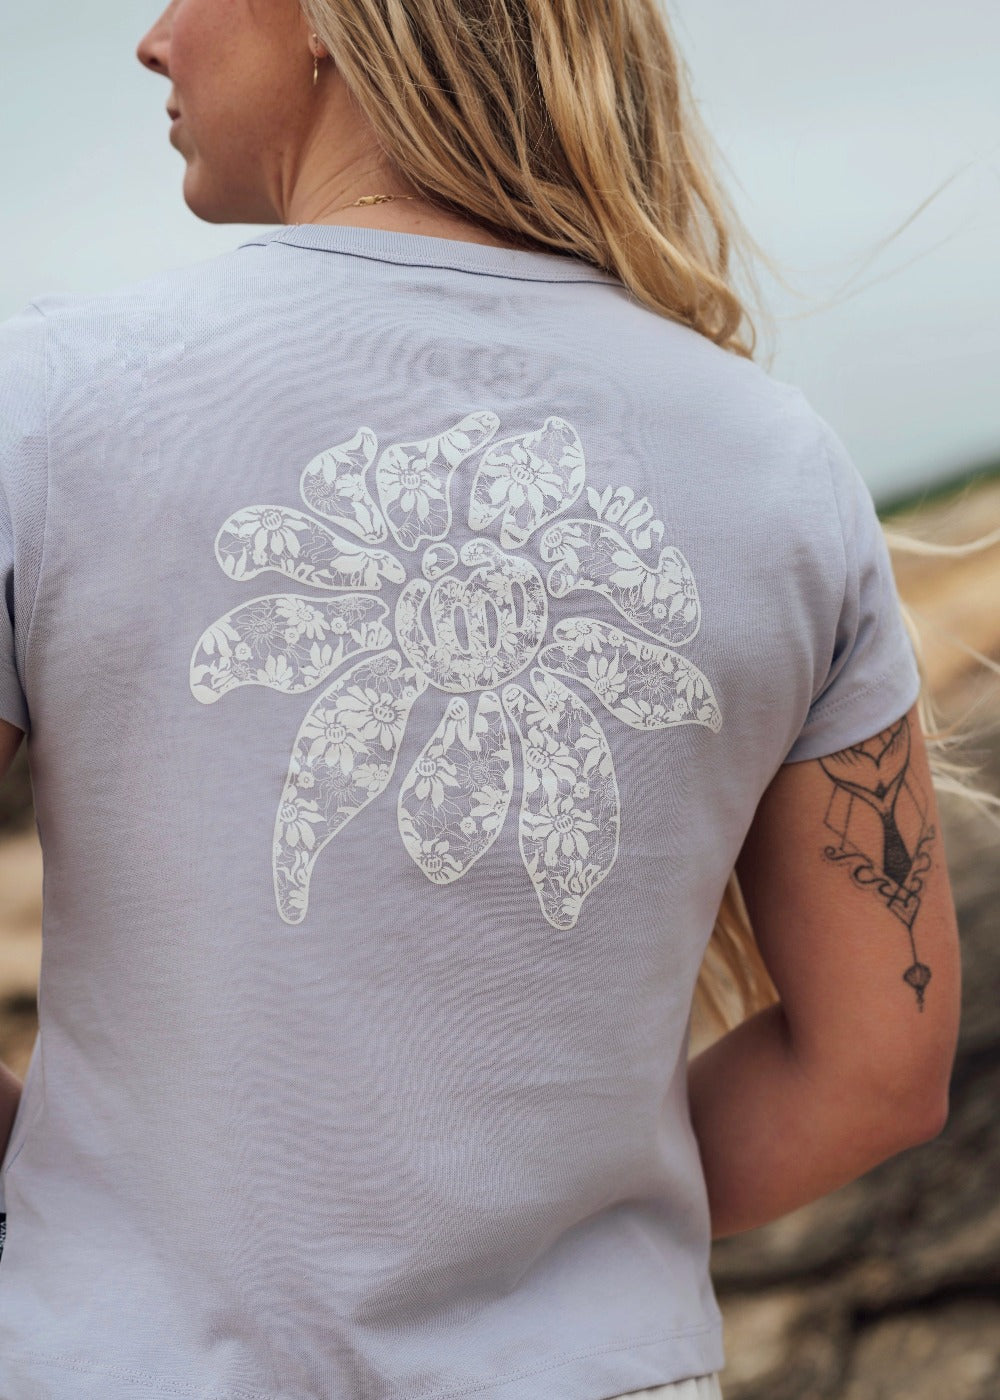 Bloomed T-Shirt by Vans